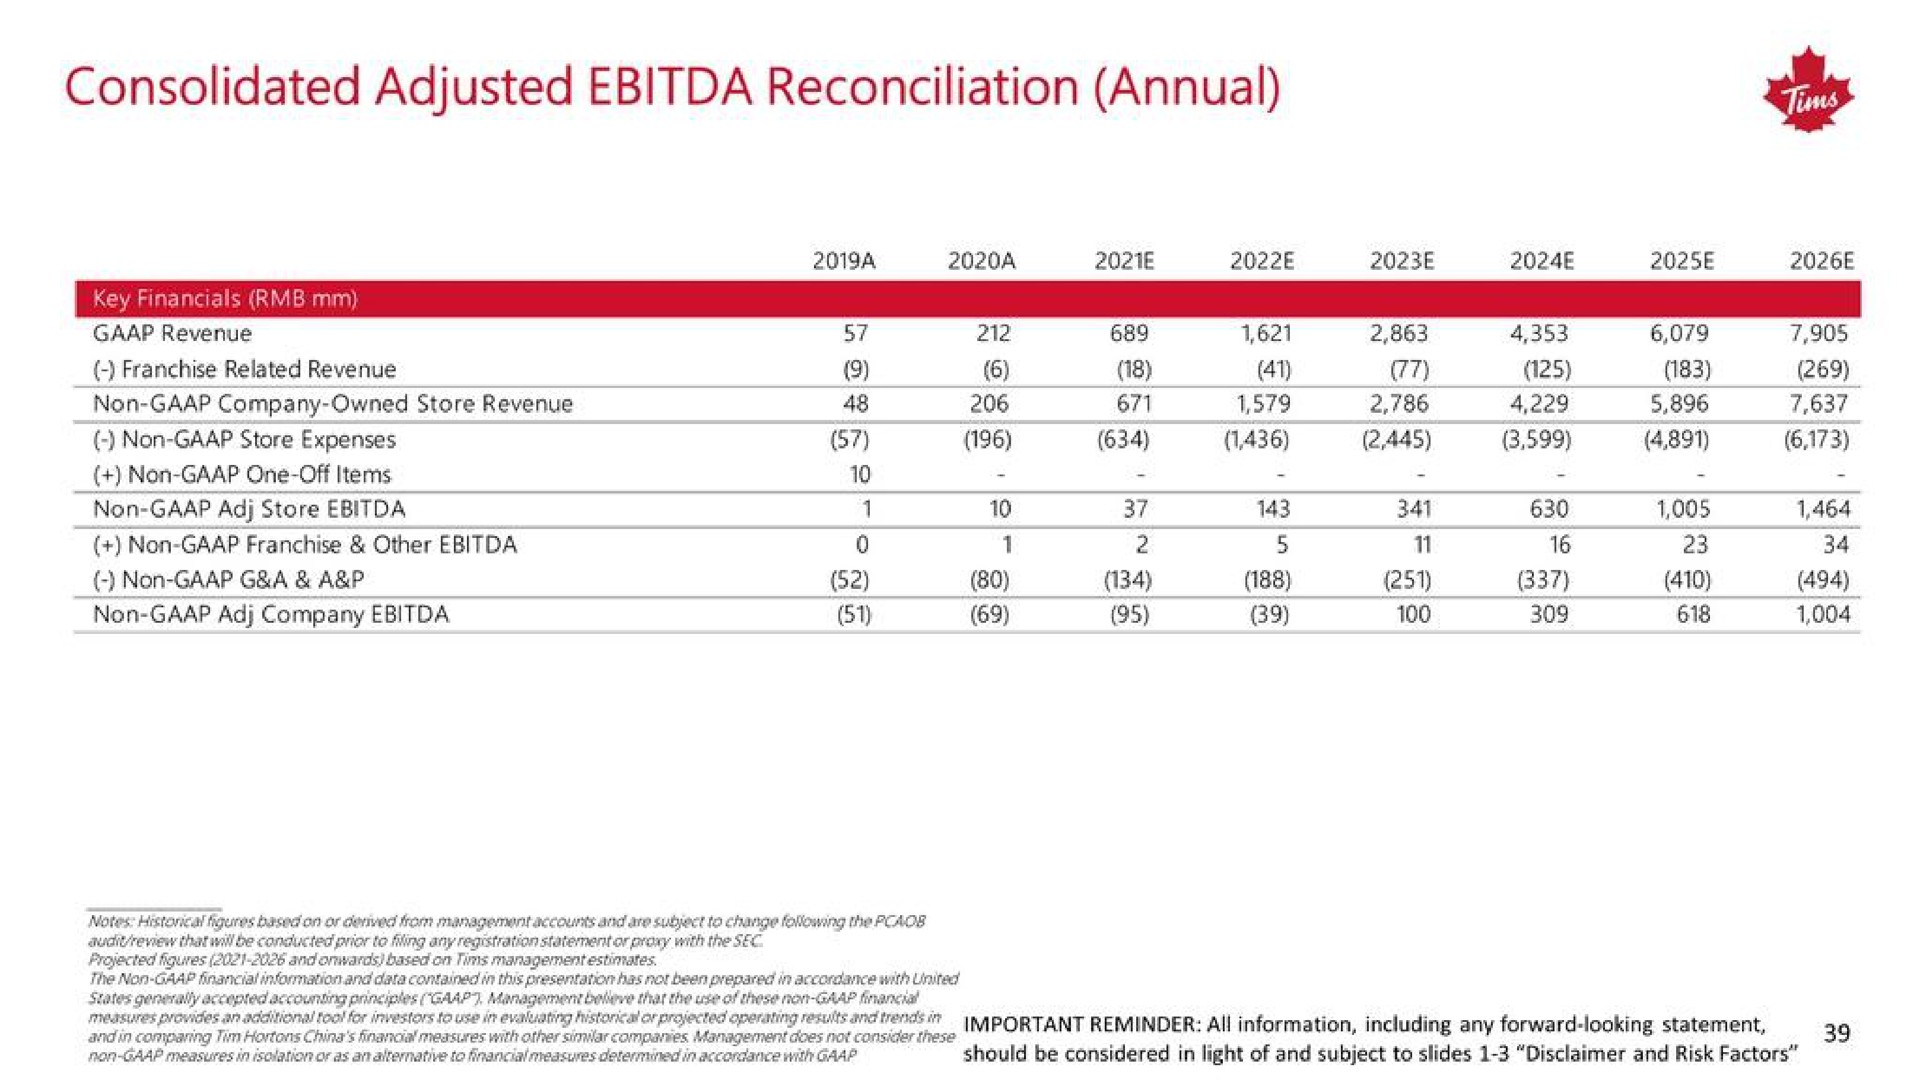 consolidated adjusted reconciliation annual | Tim Hortons China